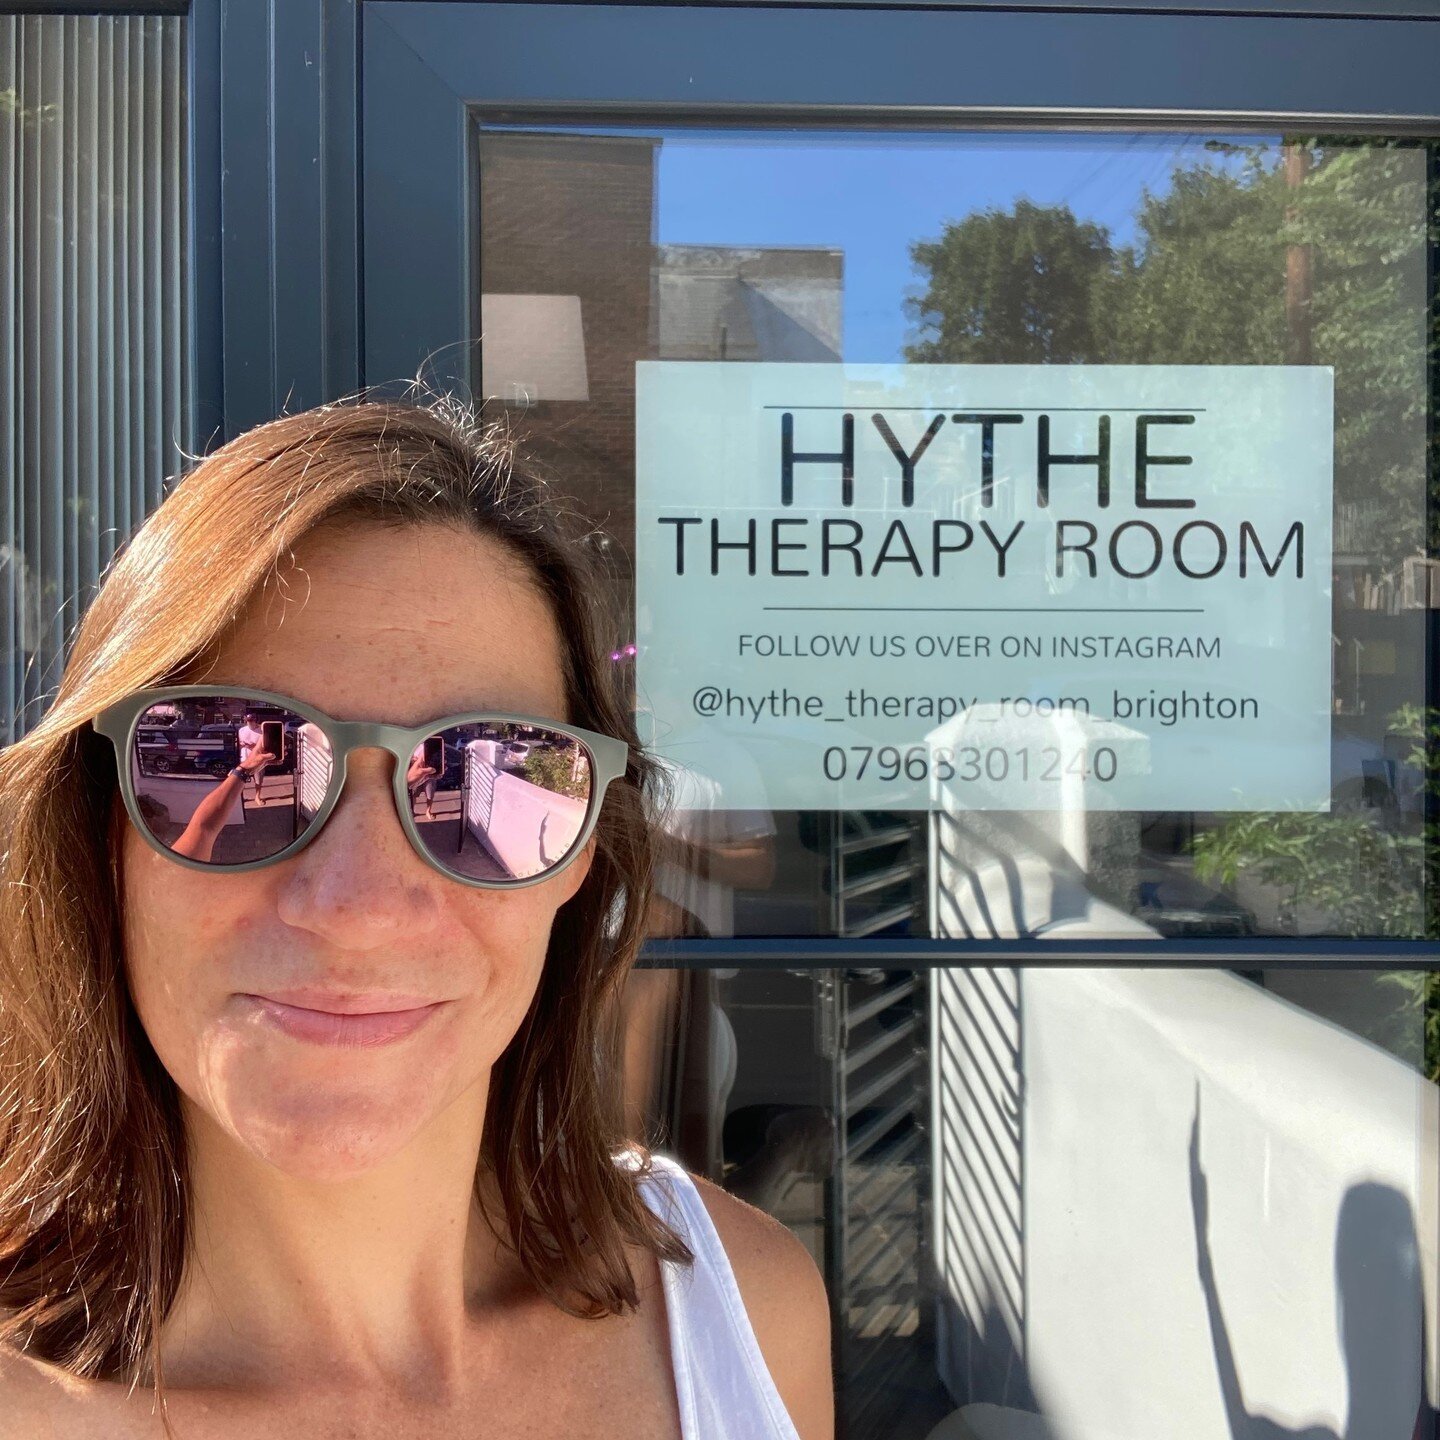 ☀️☀️☀️ EXCITING NEWS ☀️☀️☀️

We will be starting a new Women's Health clinic at the Hythe Therapy Room in Fiveways.

@hythe_therapy_room_brighton

From September, Tina will be moving her Tuesday clinic in Hove to Thursdays in Fiveways whilst the wond